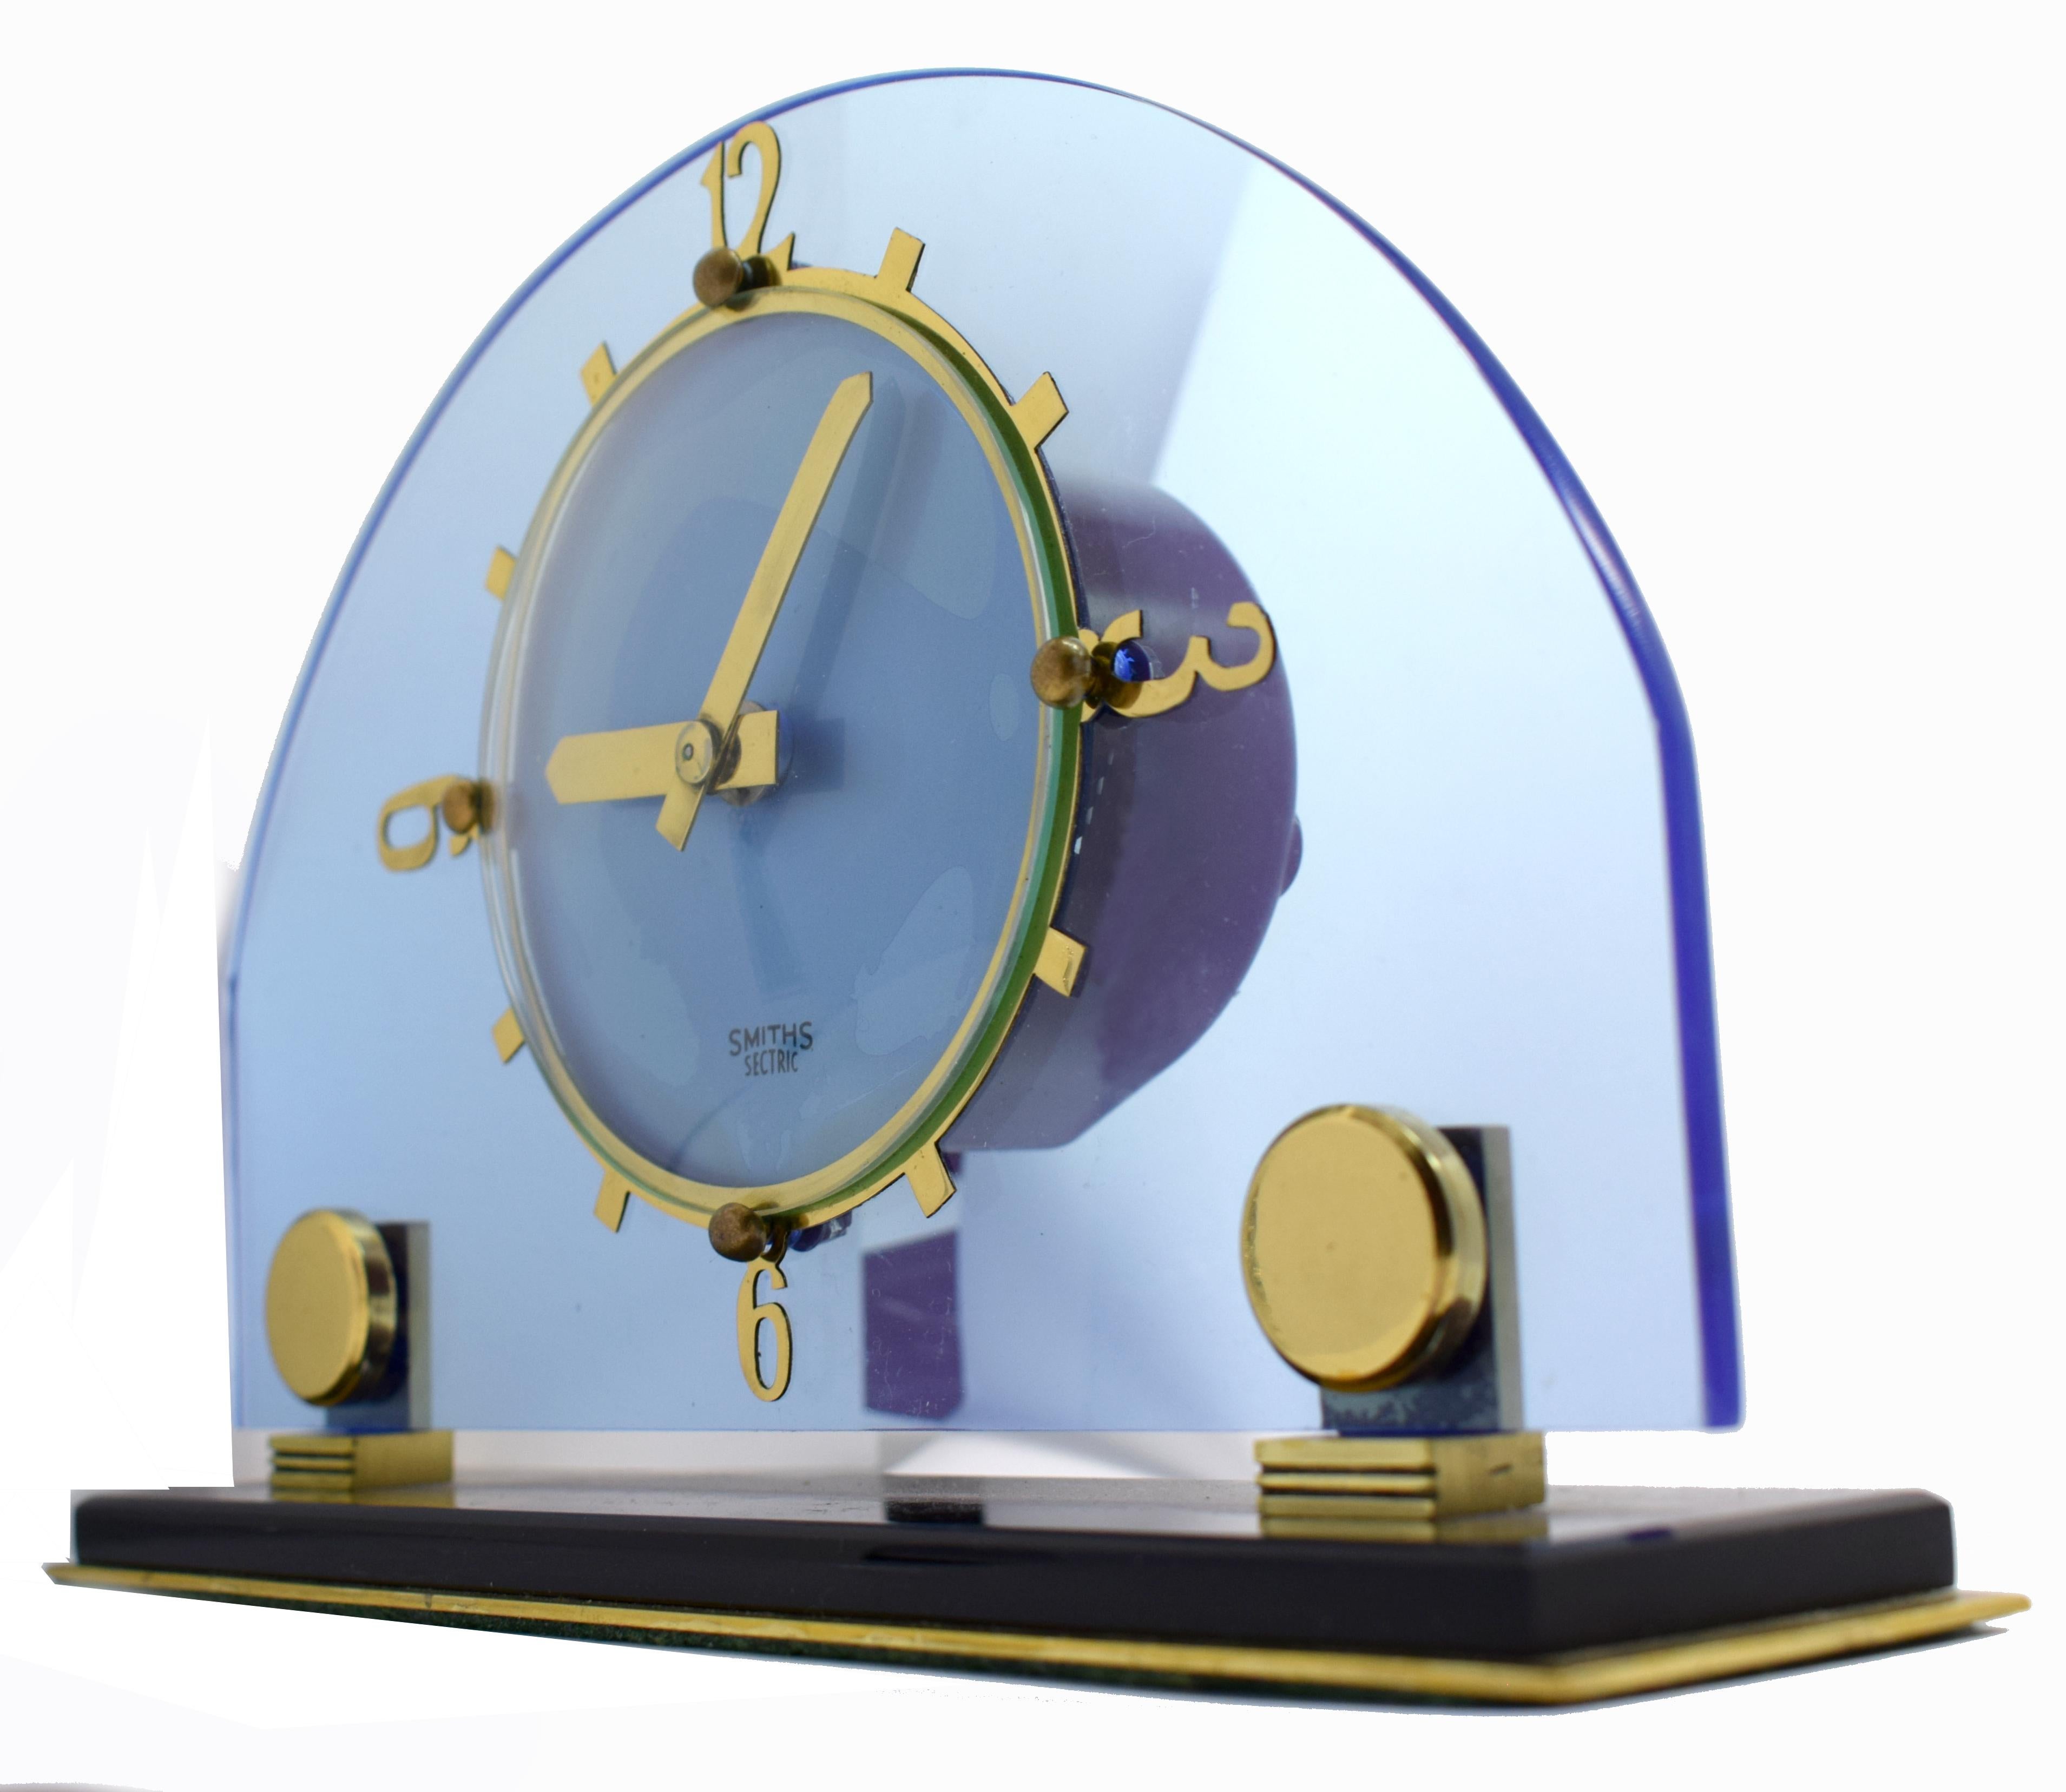 English Art Deco Blue Electric Mantle Clock by Smiths